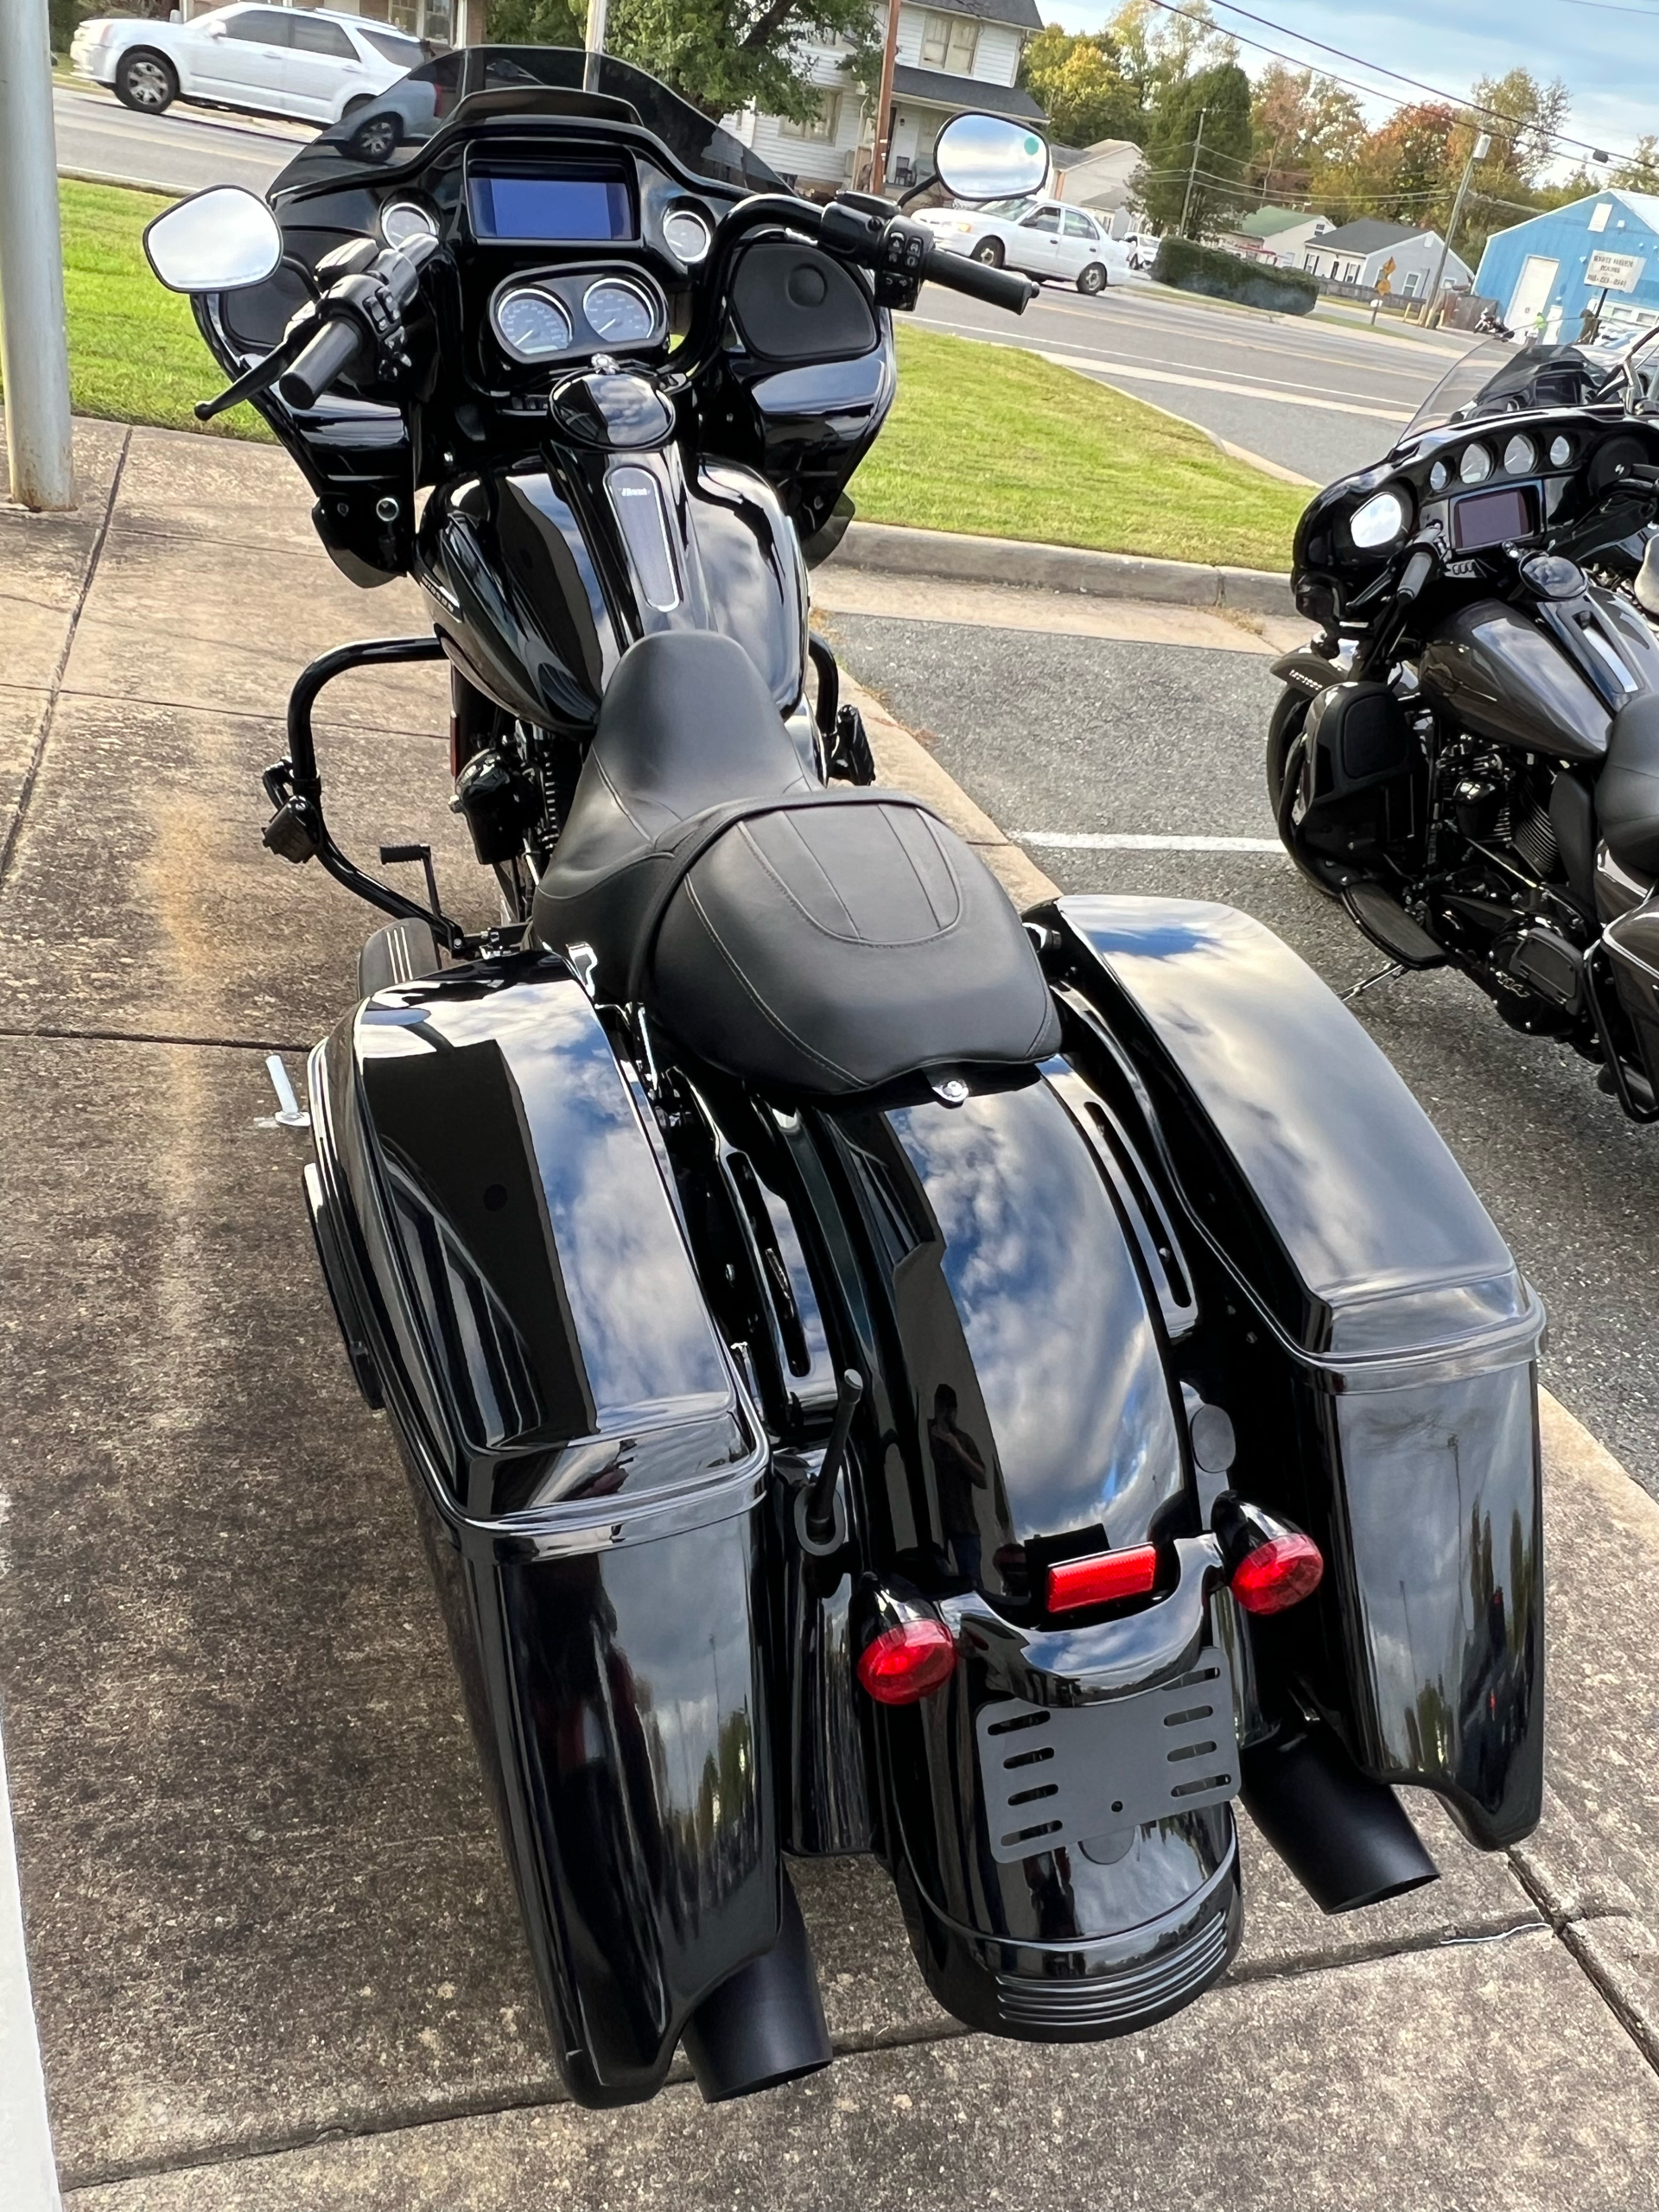 2020 Harley-Davidson ROAD GLIDE SPECIAL in Dumfries, Virginia - Photo 8